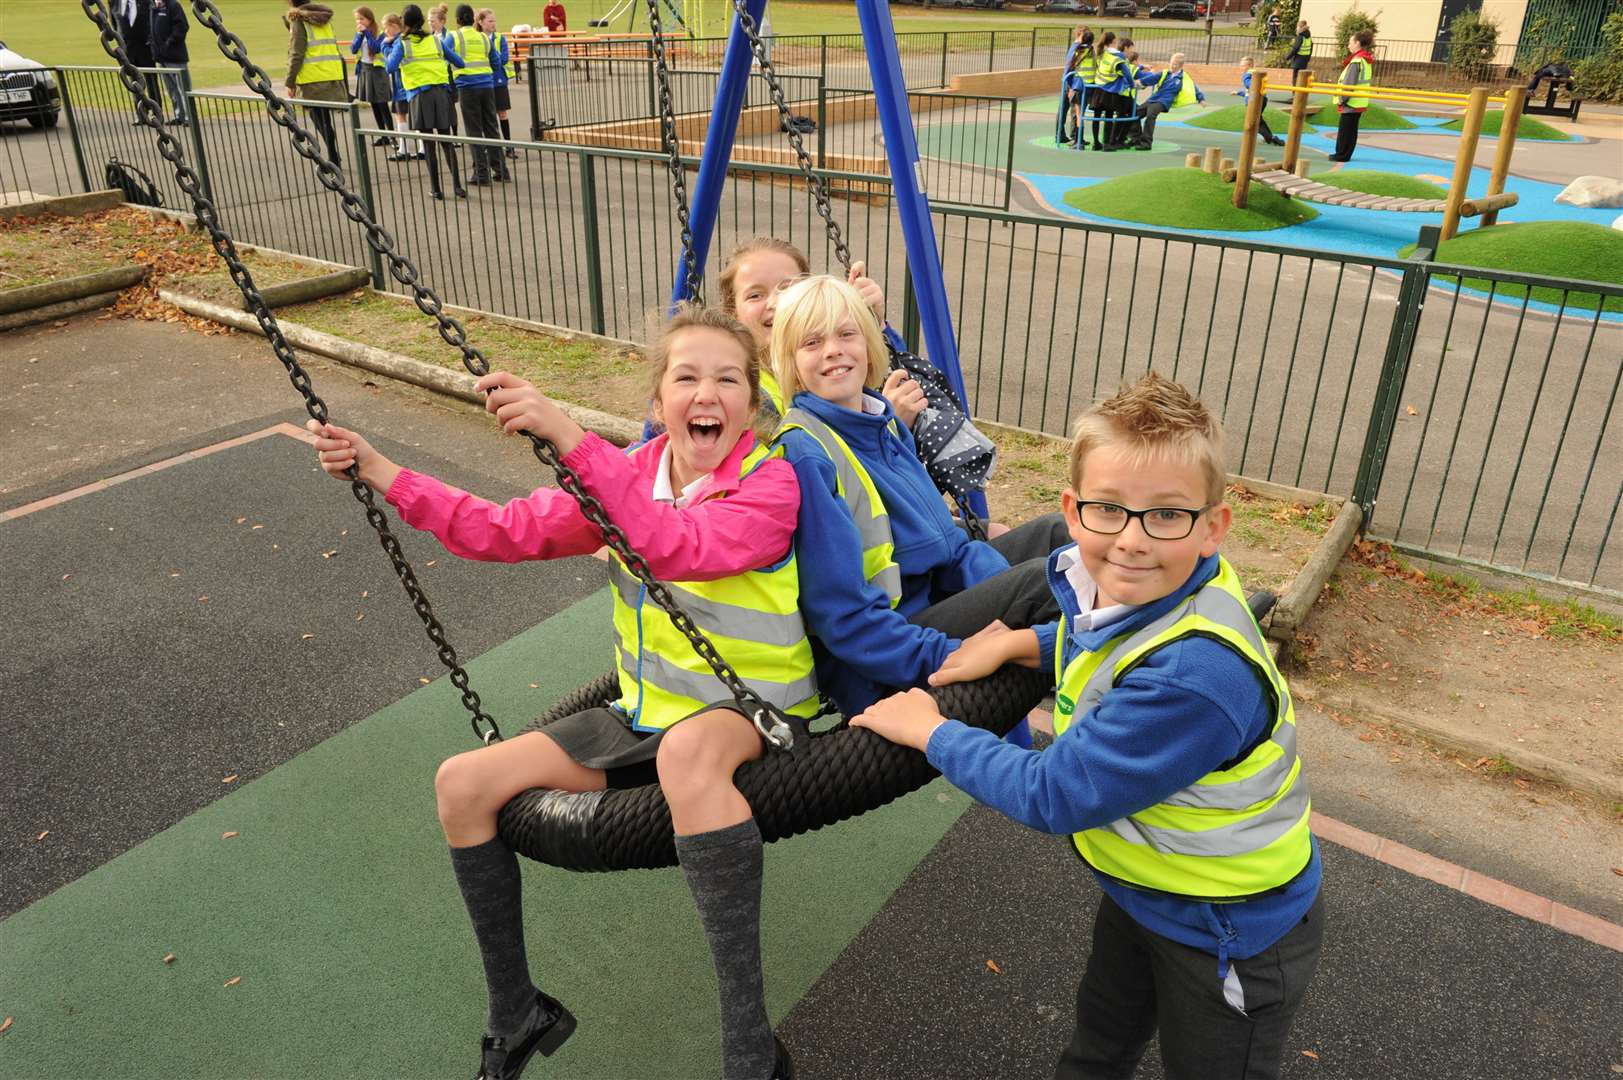 Children from Shears Green School enjoy the playground at Woodlands Park